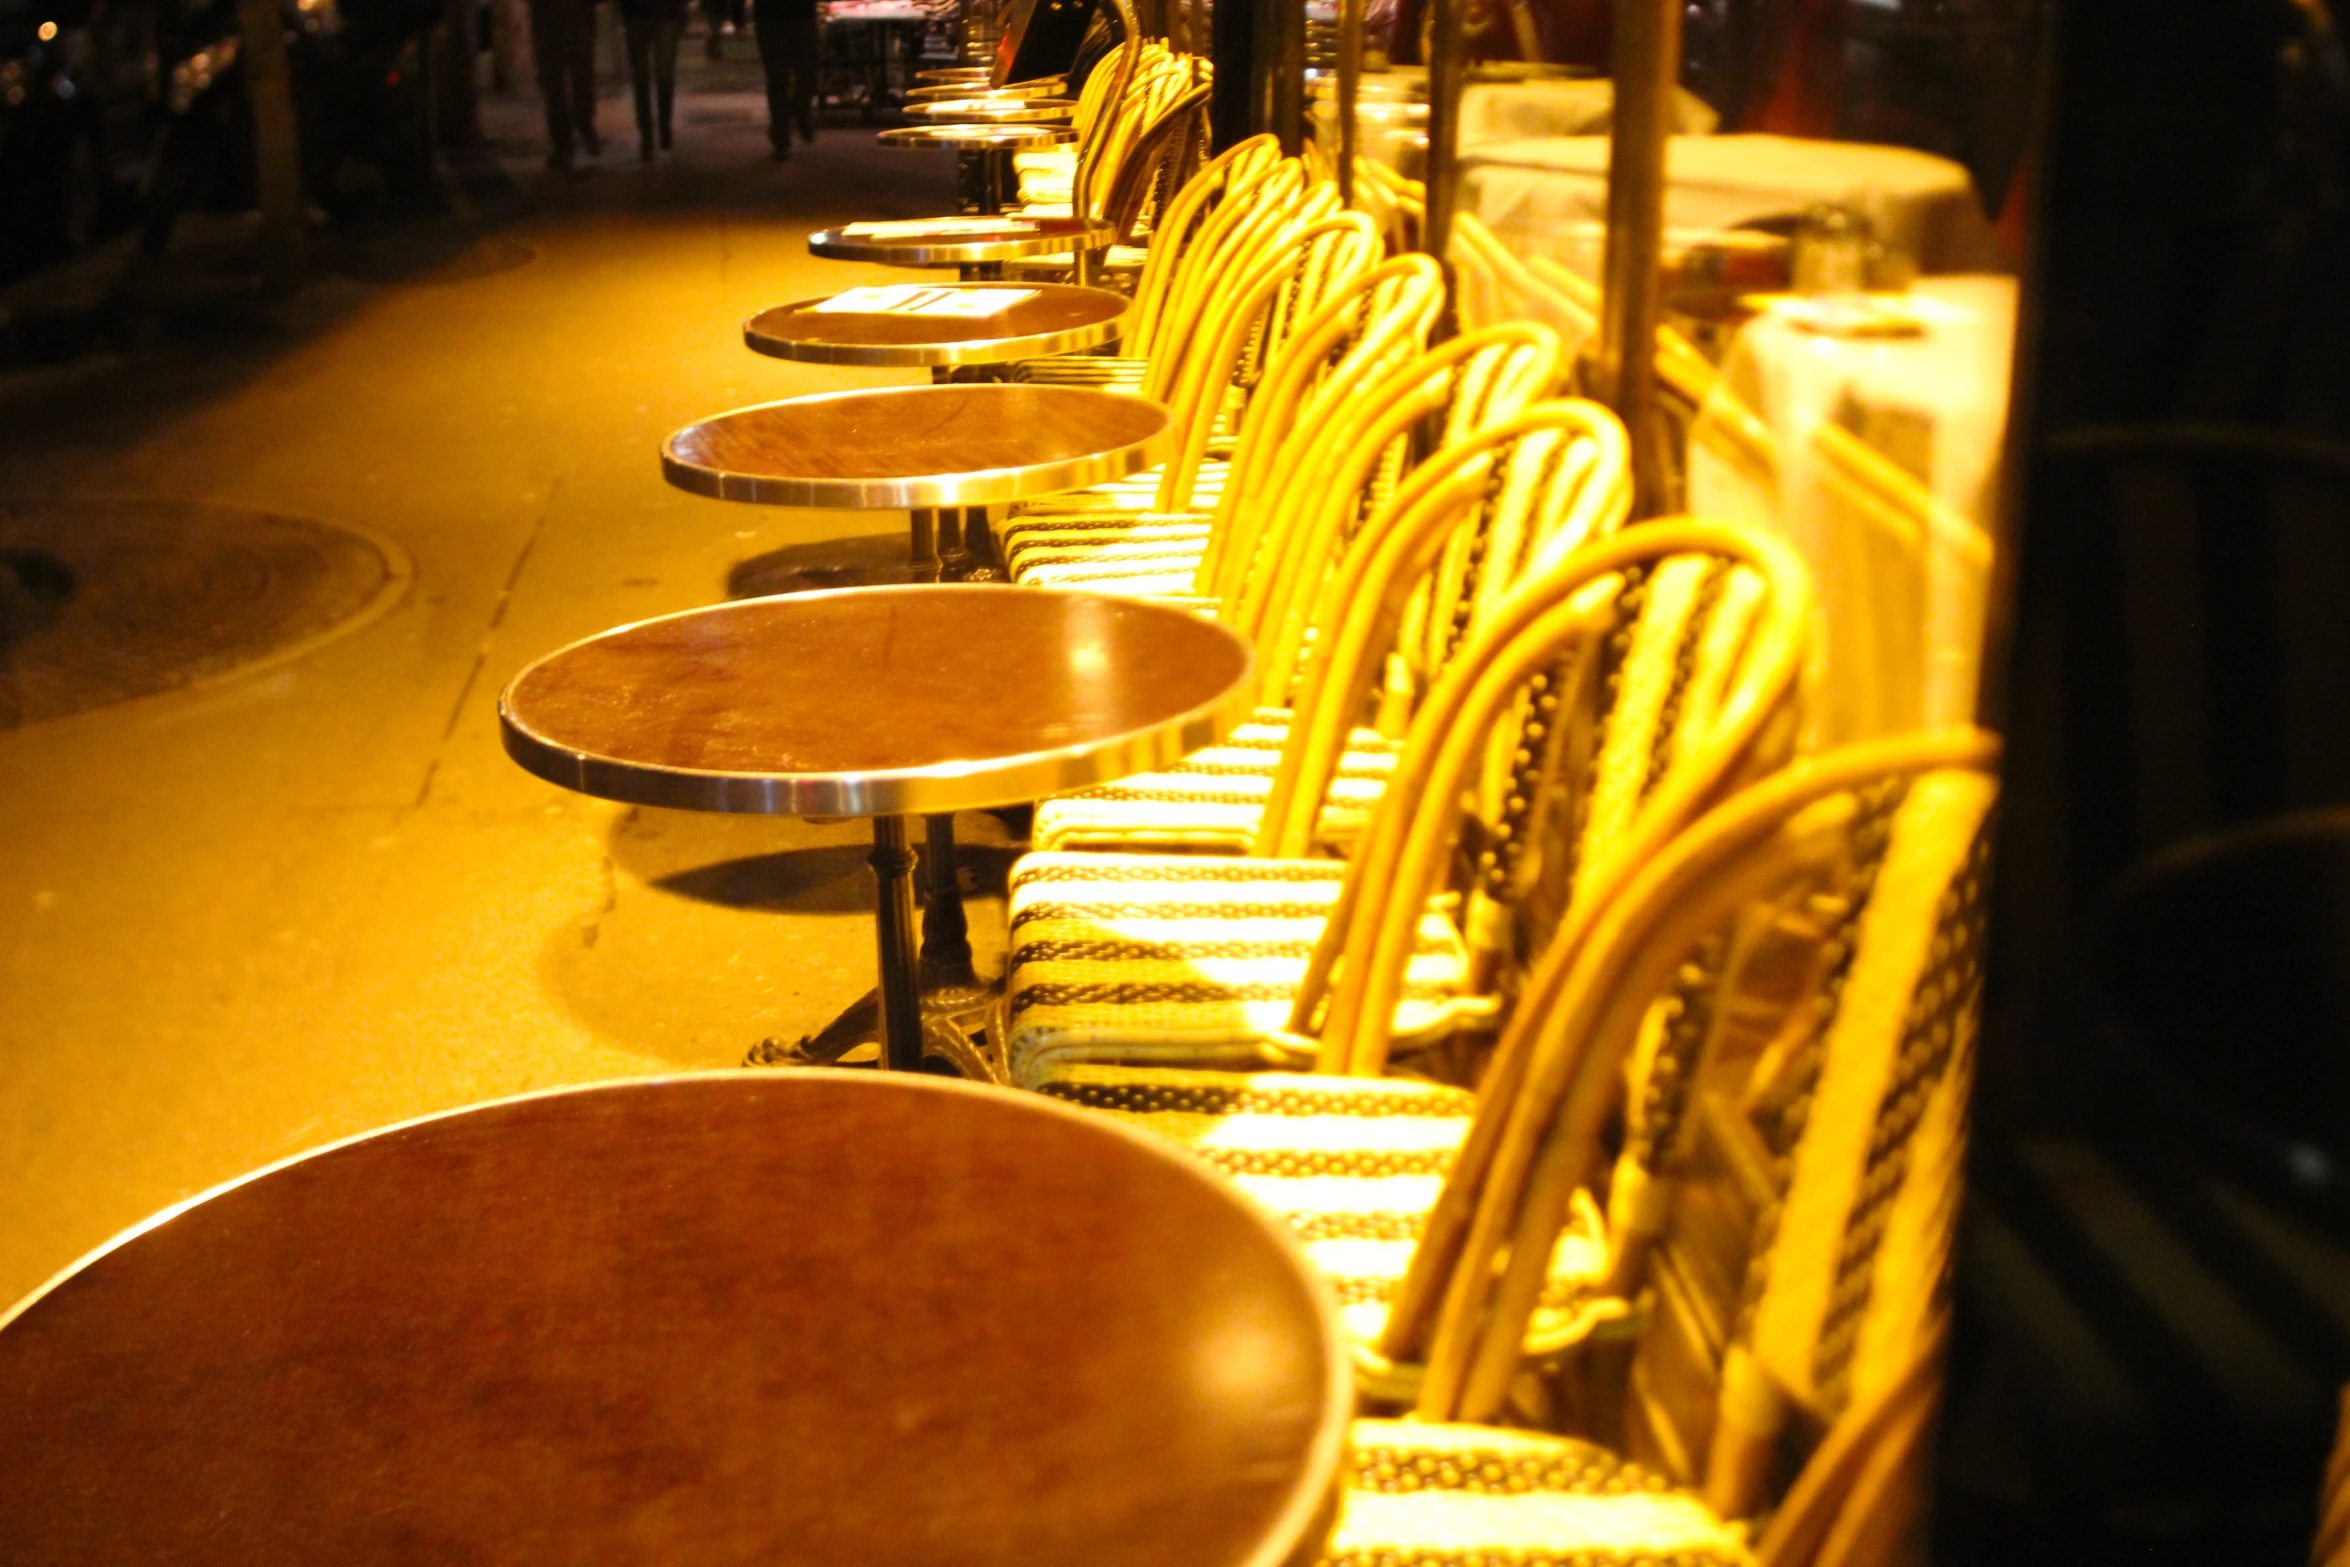 empty tables line up on a sidewalk in the dark